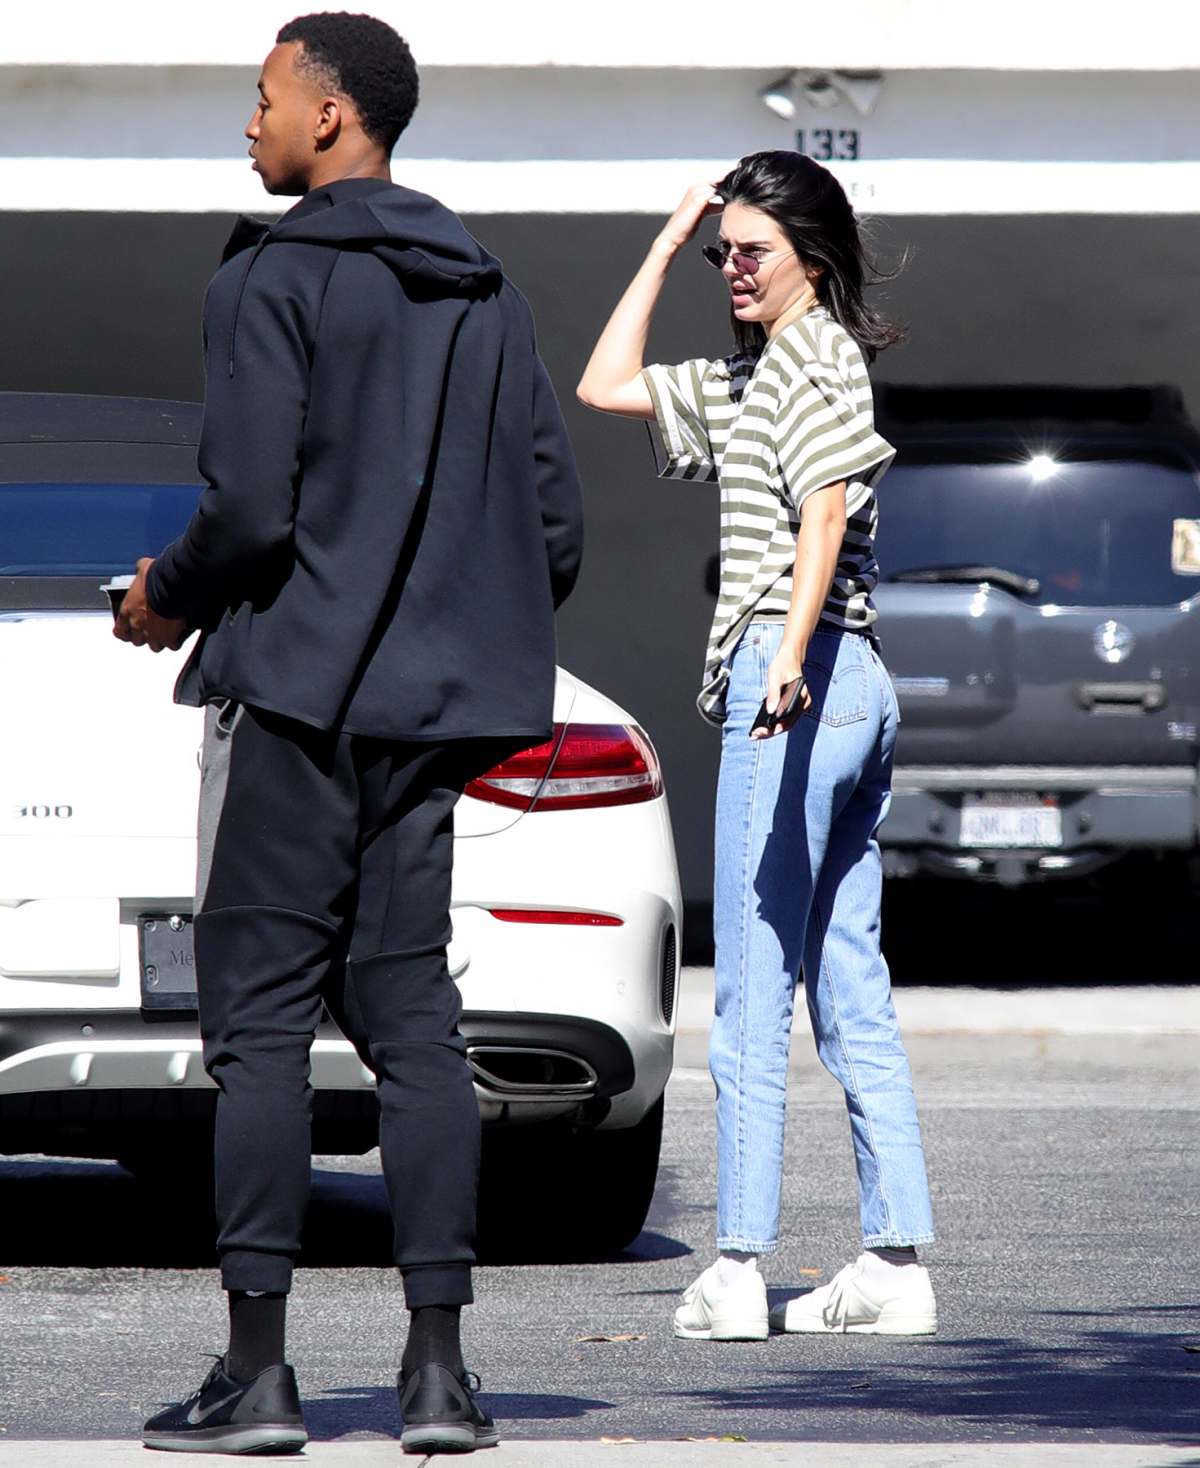 Kendall Jenner, Ben Simmons Are 'Inseparable' But 'Not Official